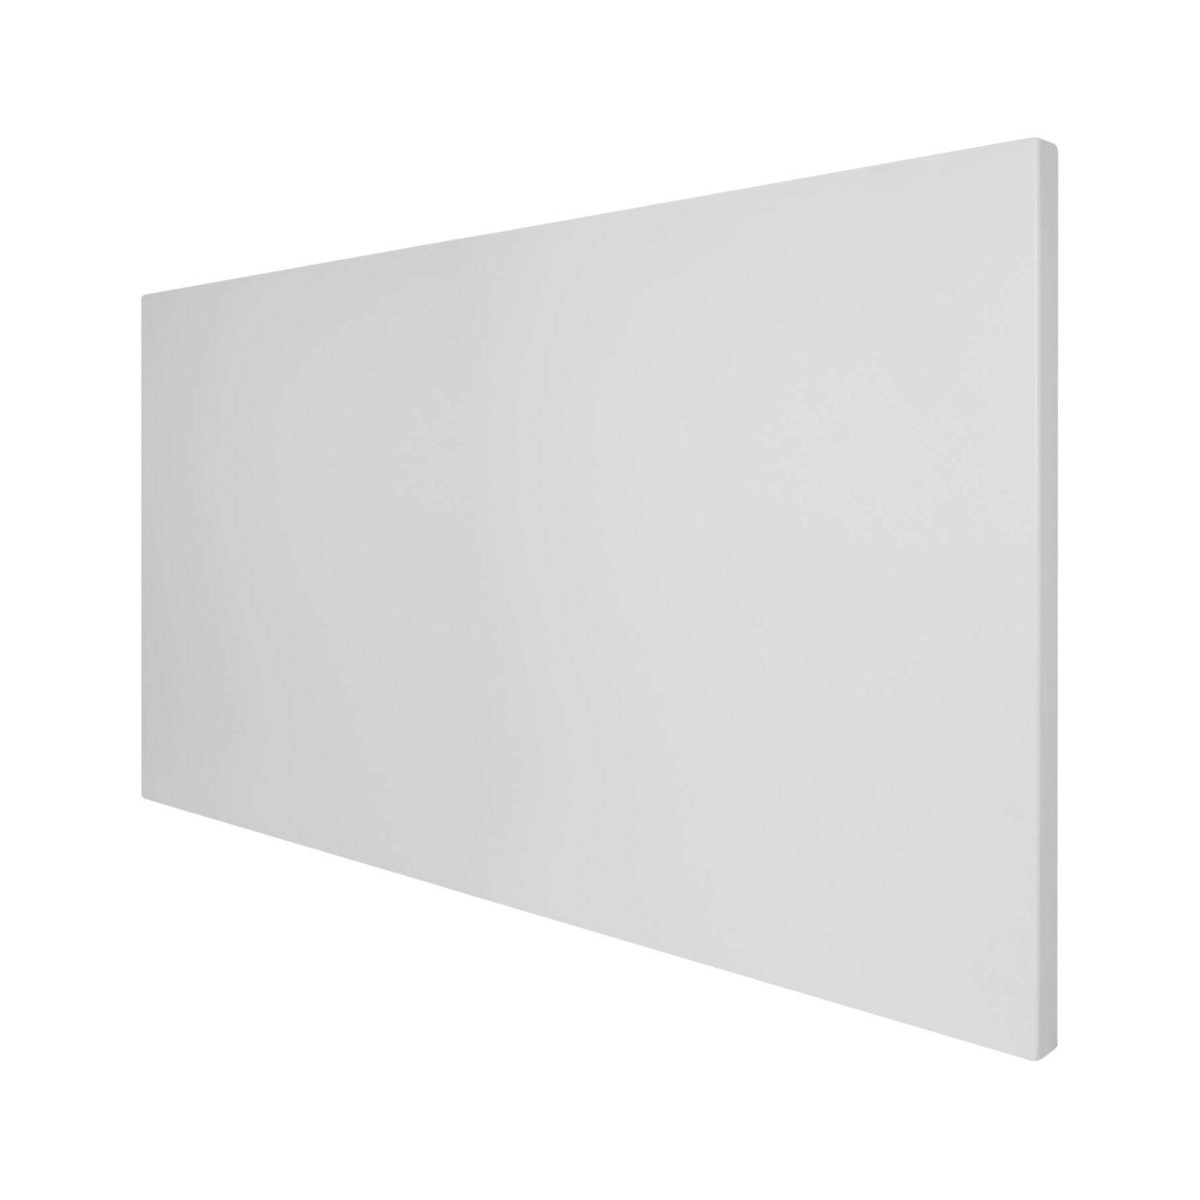 Ecostrad Opus iQ WiFi Controlled Infrared Wall Panel - 900w (1205 x 755mm)